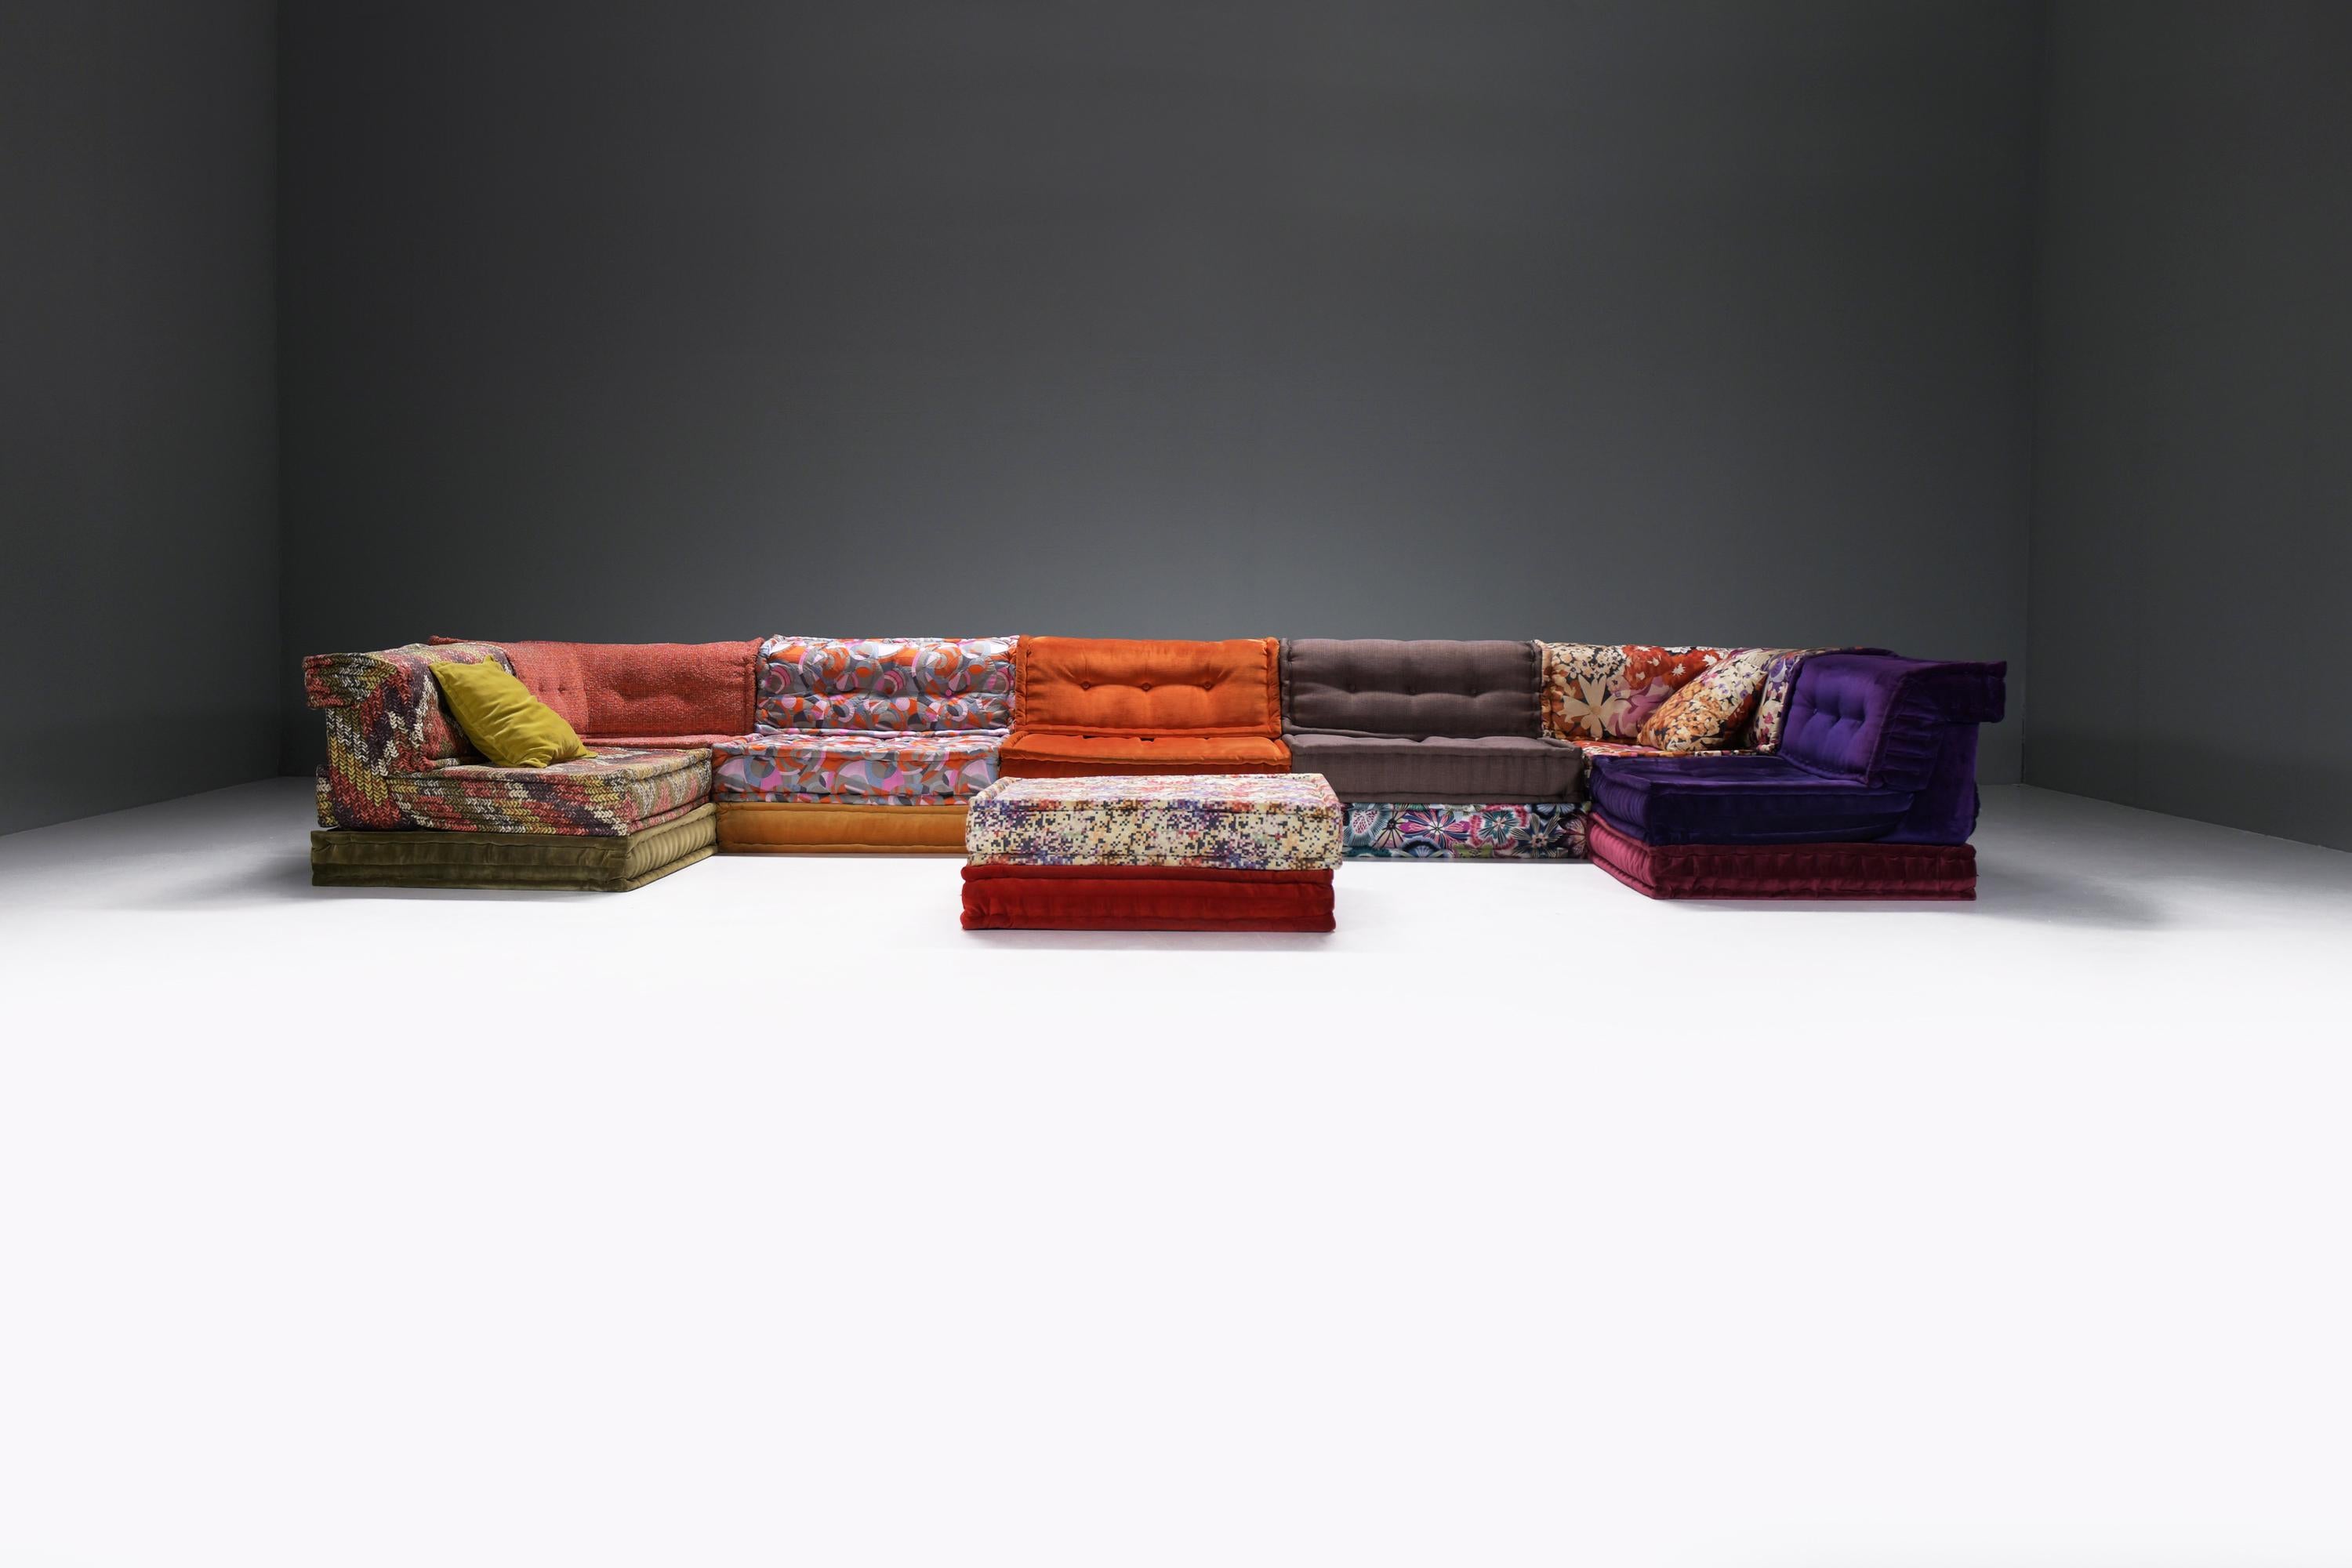 Very nice and large Mah Jong modular sofa in the Missoni fabric!  Stunning colors!
Designed by Hans Hopfer for Roche Bobois France.

Designed by Hans Hopfer in 1971, the Mah Jong sofa is an iconic model of the Roche Bobois collections, and offers